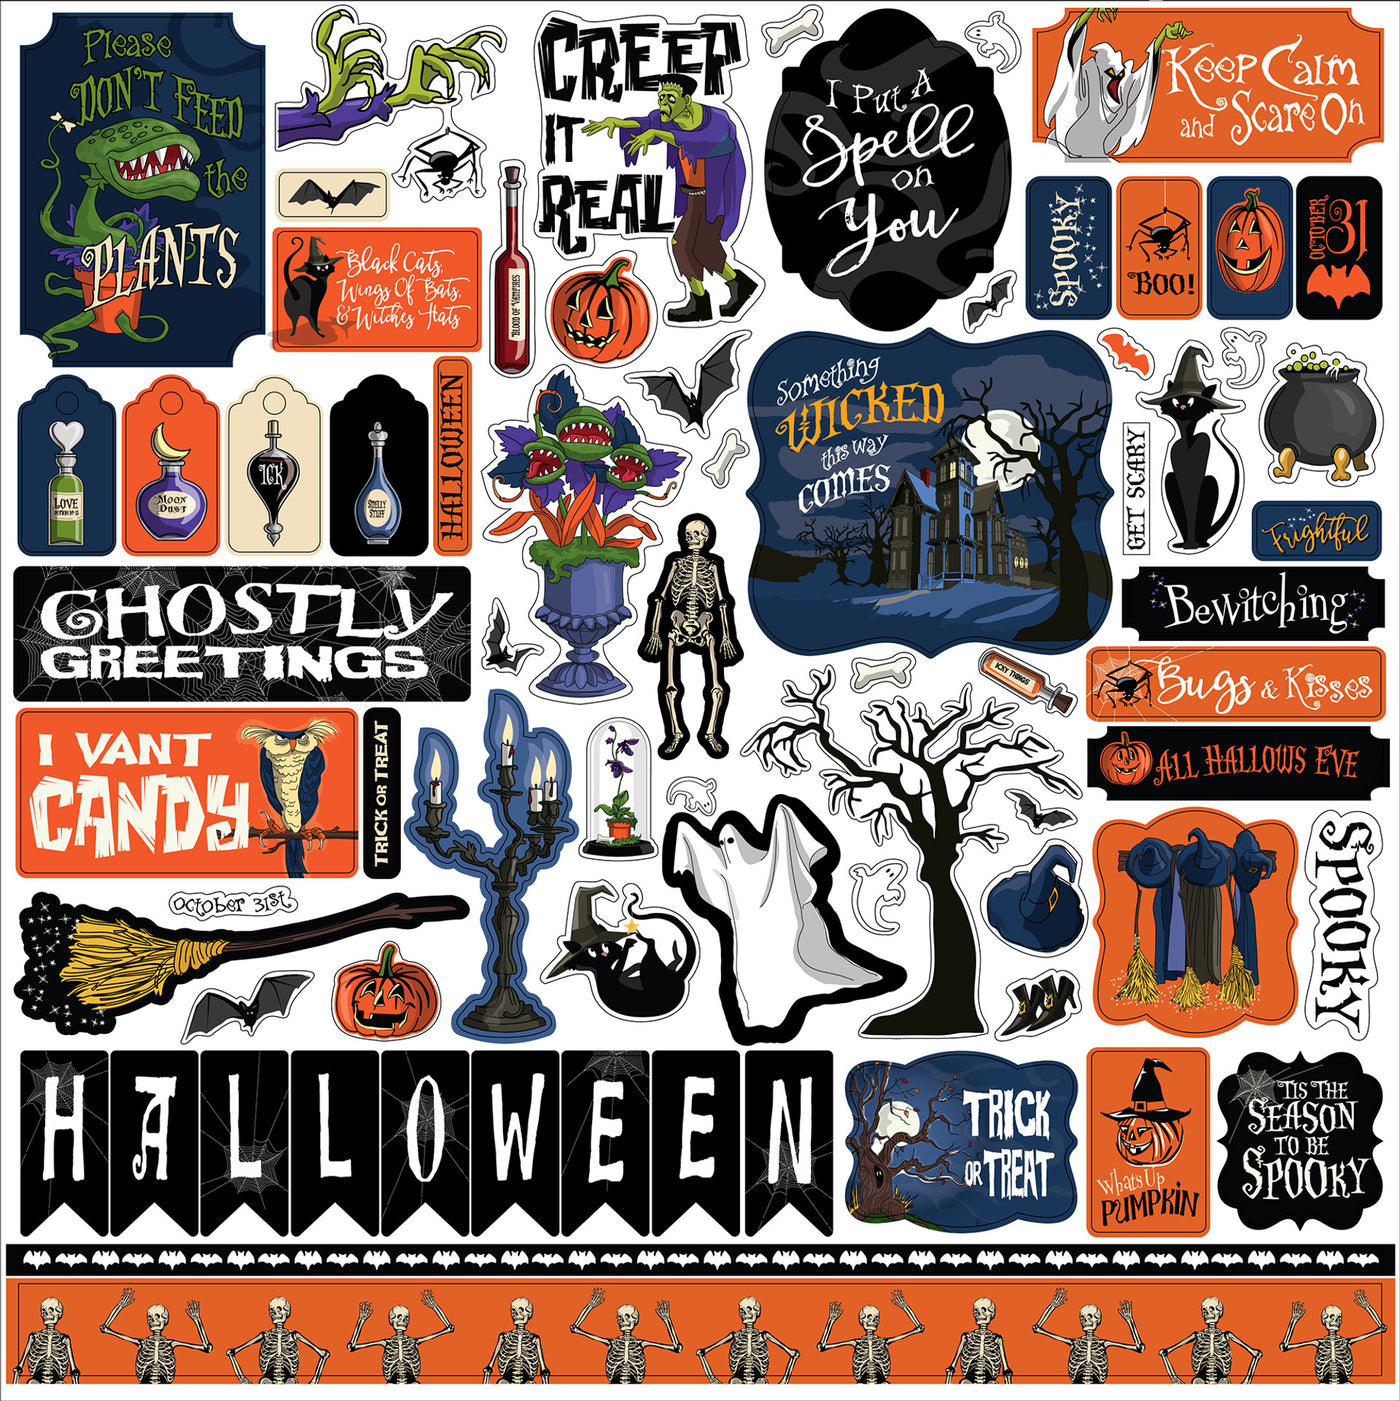 Hocus Pocus Elements 12" x 12" Cardstock Stickers from Hocus Pocus Collection by Carta Bella. Stickers include phrases, banners, pumpkins, ghosts, skeletons, and more!